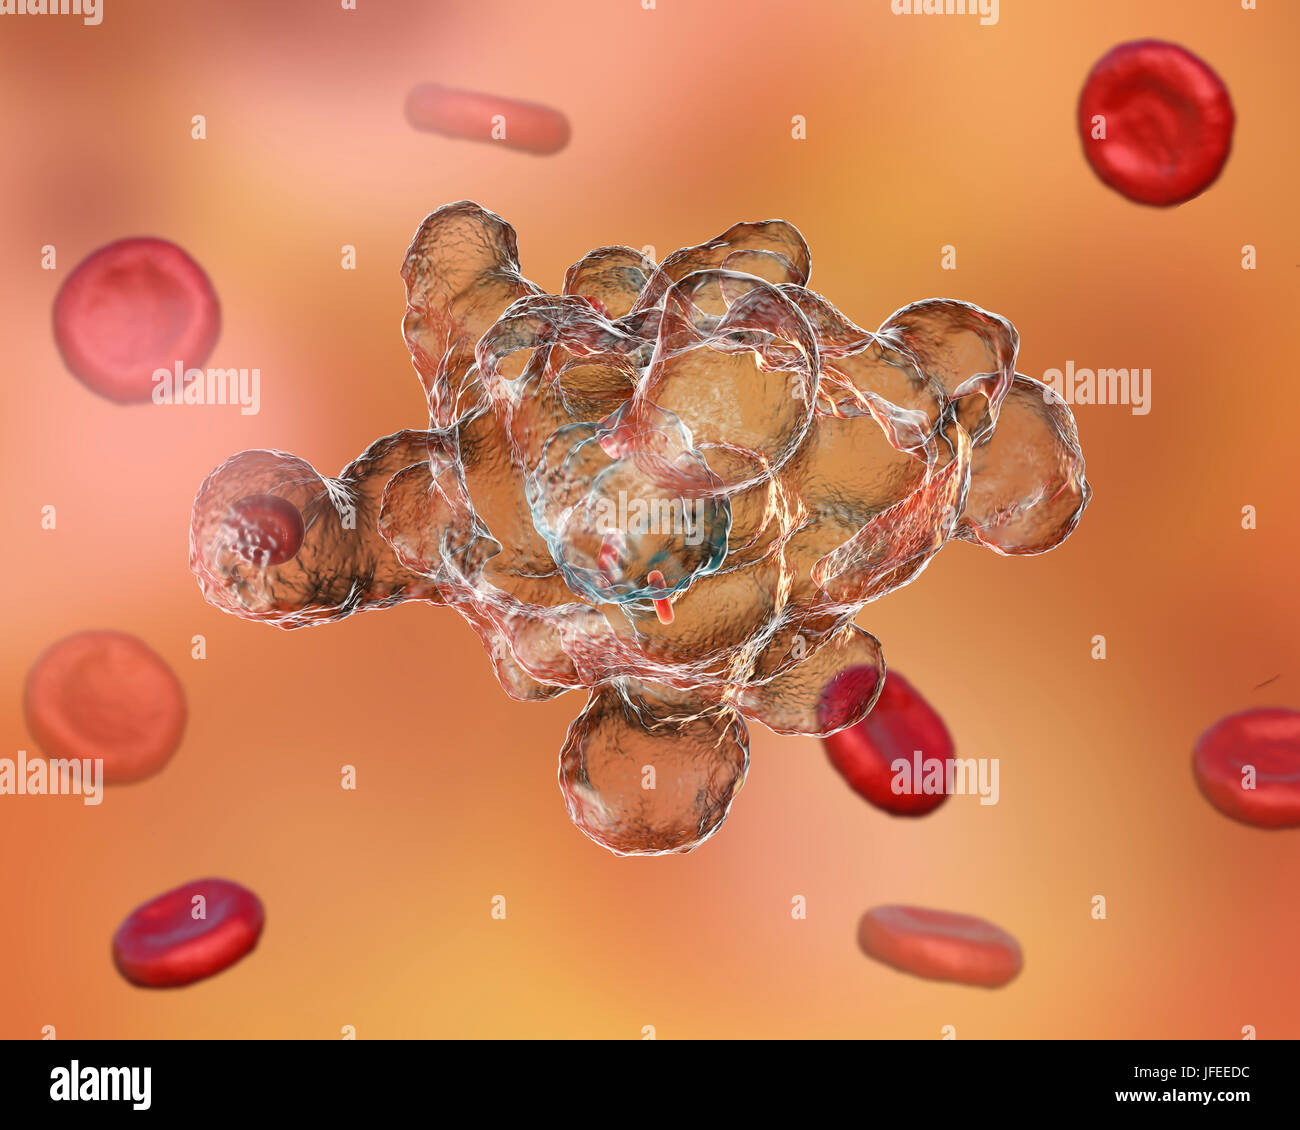 Parasitic amoeba (Entamoeba histolytica) engulfing red blood cells, computer illustration. This single-celled organism causes amoebic dysentery and ulcers (vegetative trophozoite stage). It is spread by faecal contamination of food and water and is most common where sanitation is poor. Amoebae invade the intestine but may spread to the liver, lungs and other tissues. Infection is caused by the ingestion of cysts that develop into the pathogenic trophozoite amoeba seen here. Entamoeba histolytica occurs worldwide, with up to 50% of the population being infected primarily in warmer climates. Stock Photo